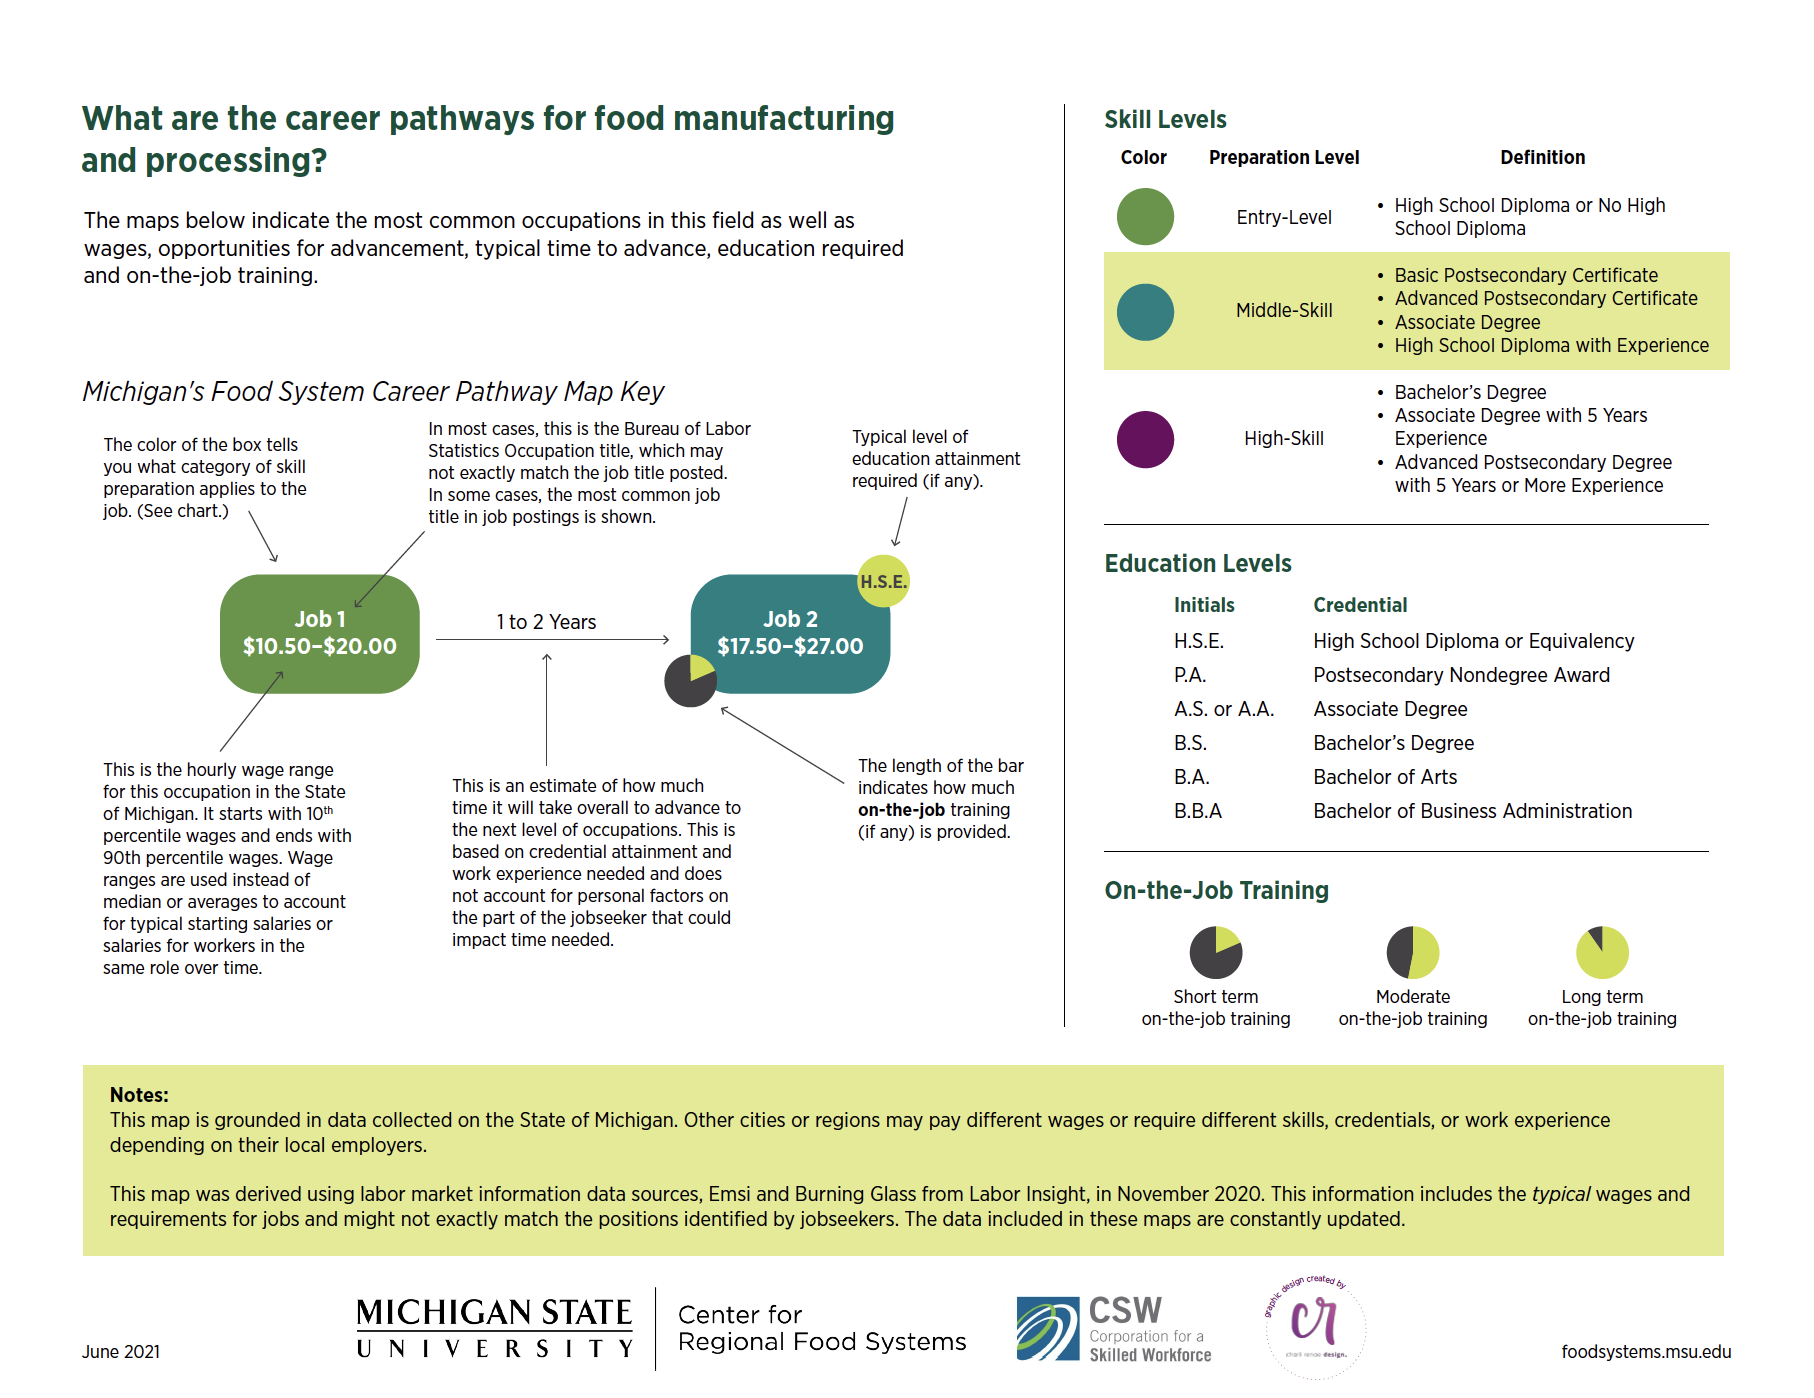 This key describes what the elements of the career pathway maps mean.